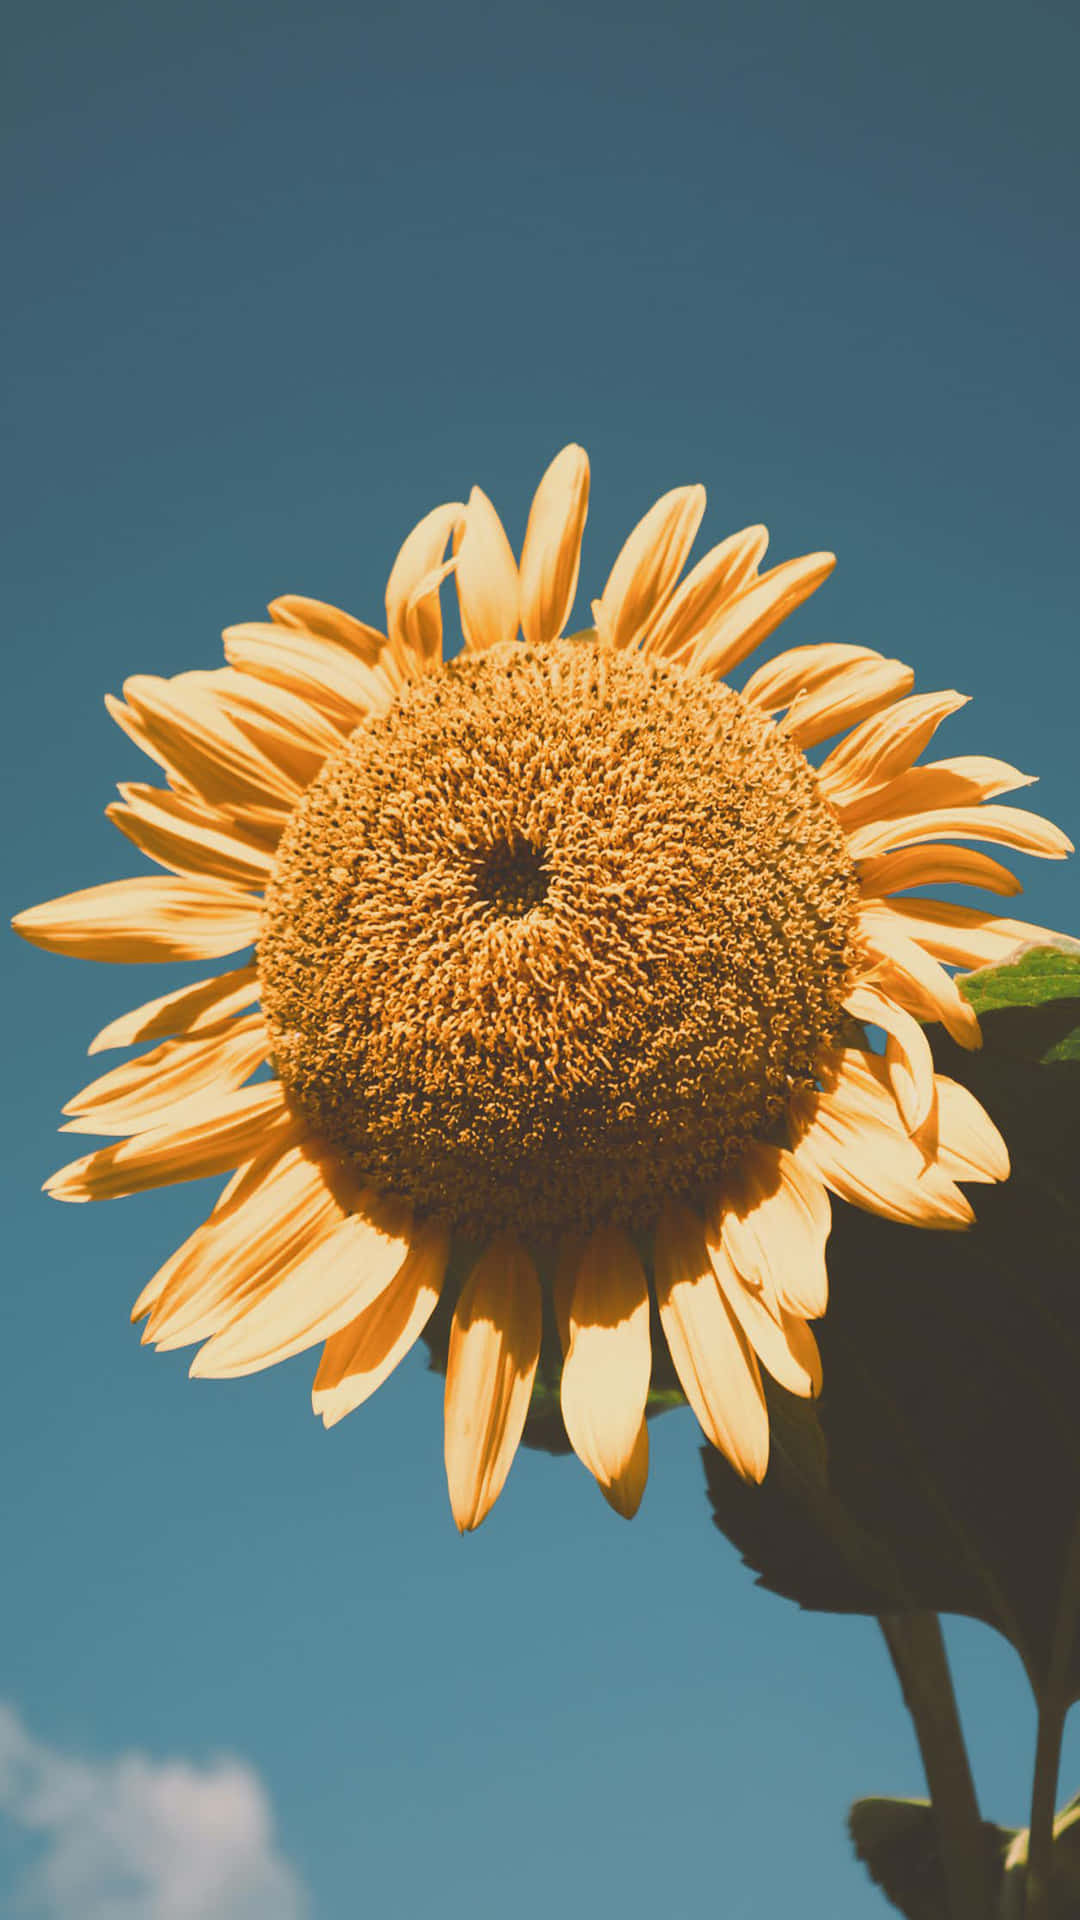 Embrace the Beauty of Sunflowers with this Aesthetic iPhone Wallpaper Wallpaper